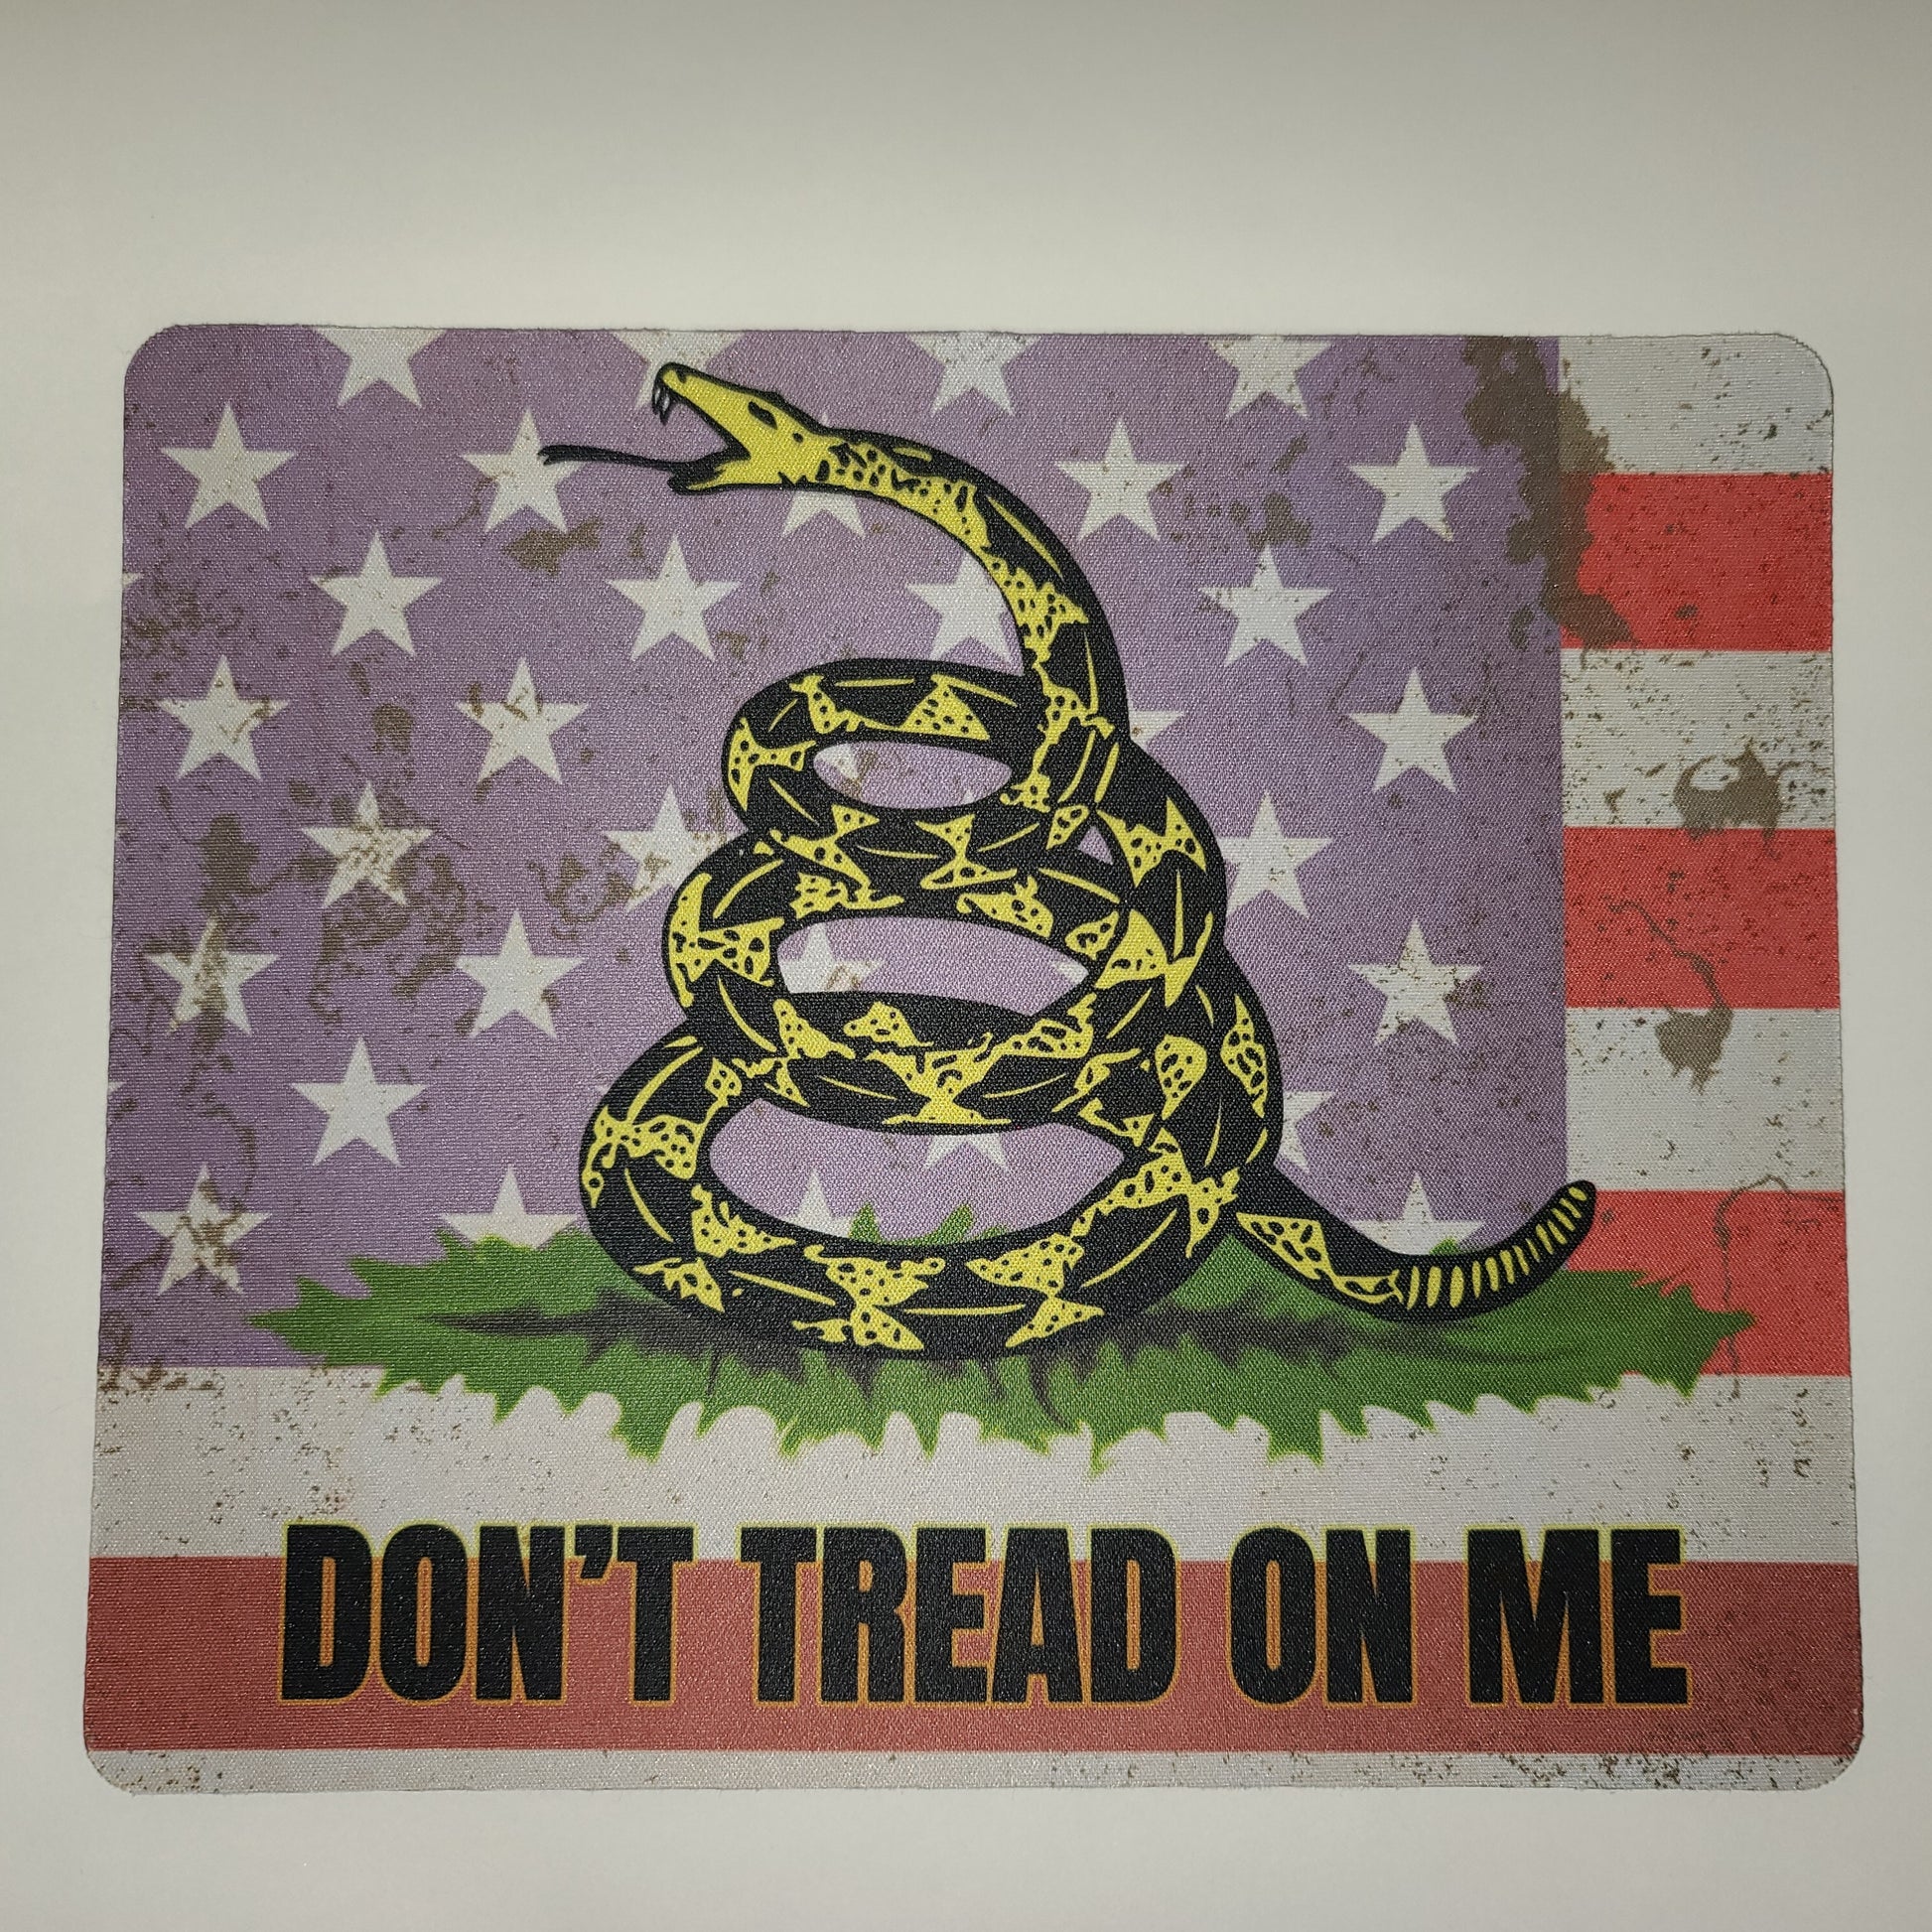 Don't tread on me - Mouse pad 2nd amendmnet agorism american flag american made gadsden libertarian liberty limited government made in america small business treason voluntaryism